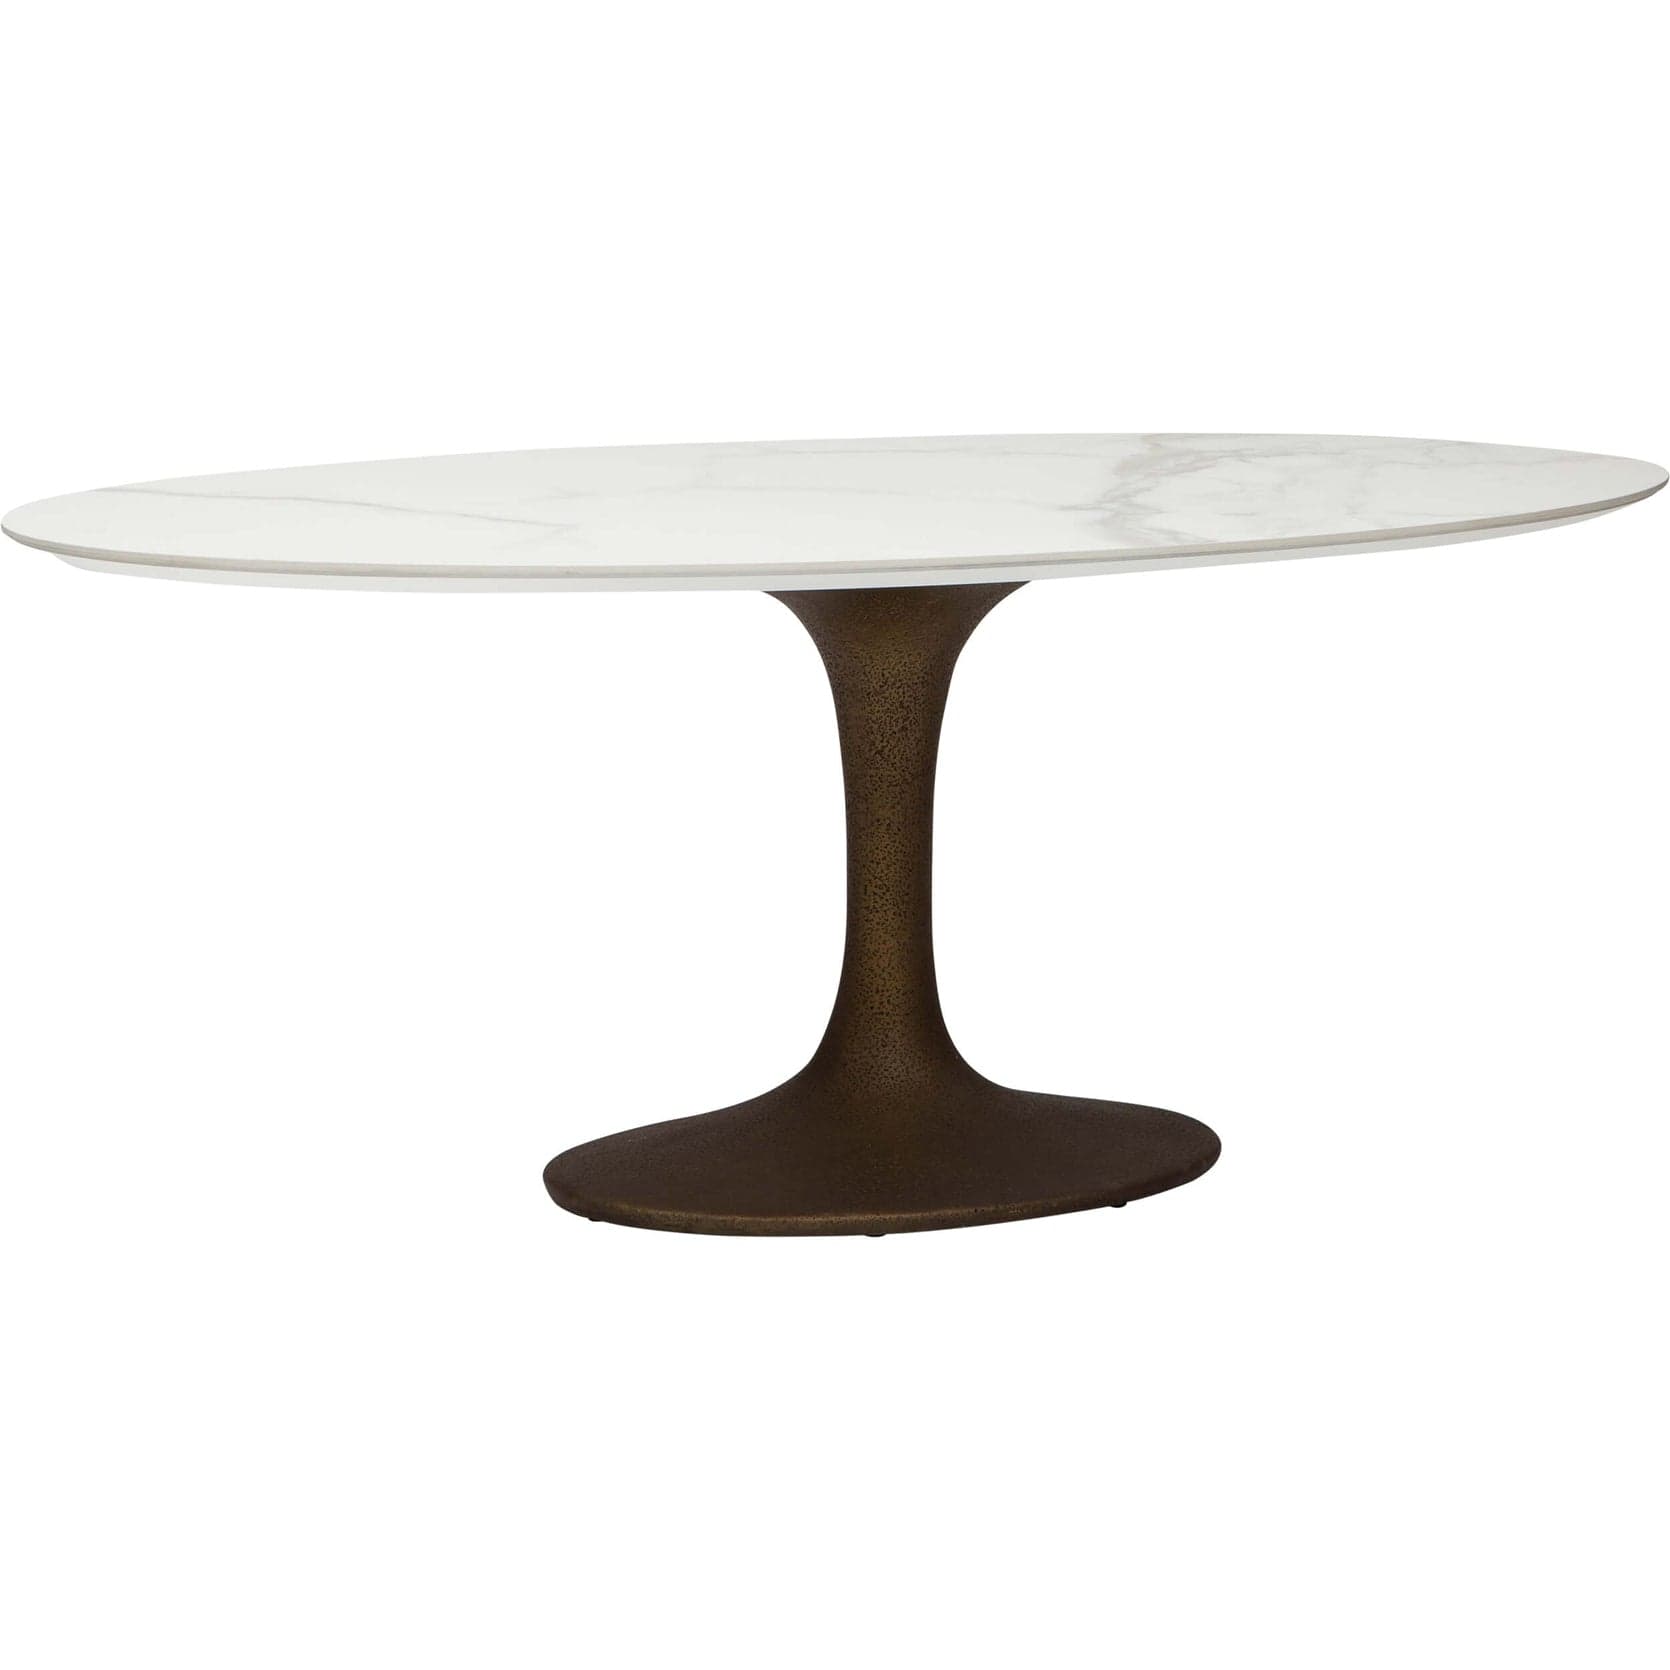 Image of Arielle Dining Table, White Top/Brass Base